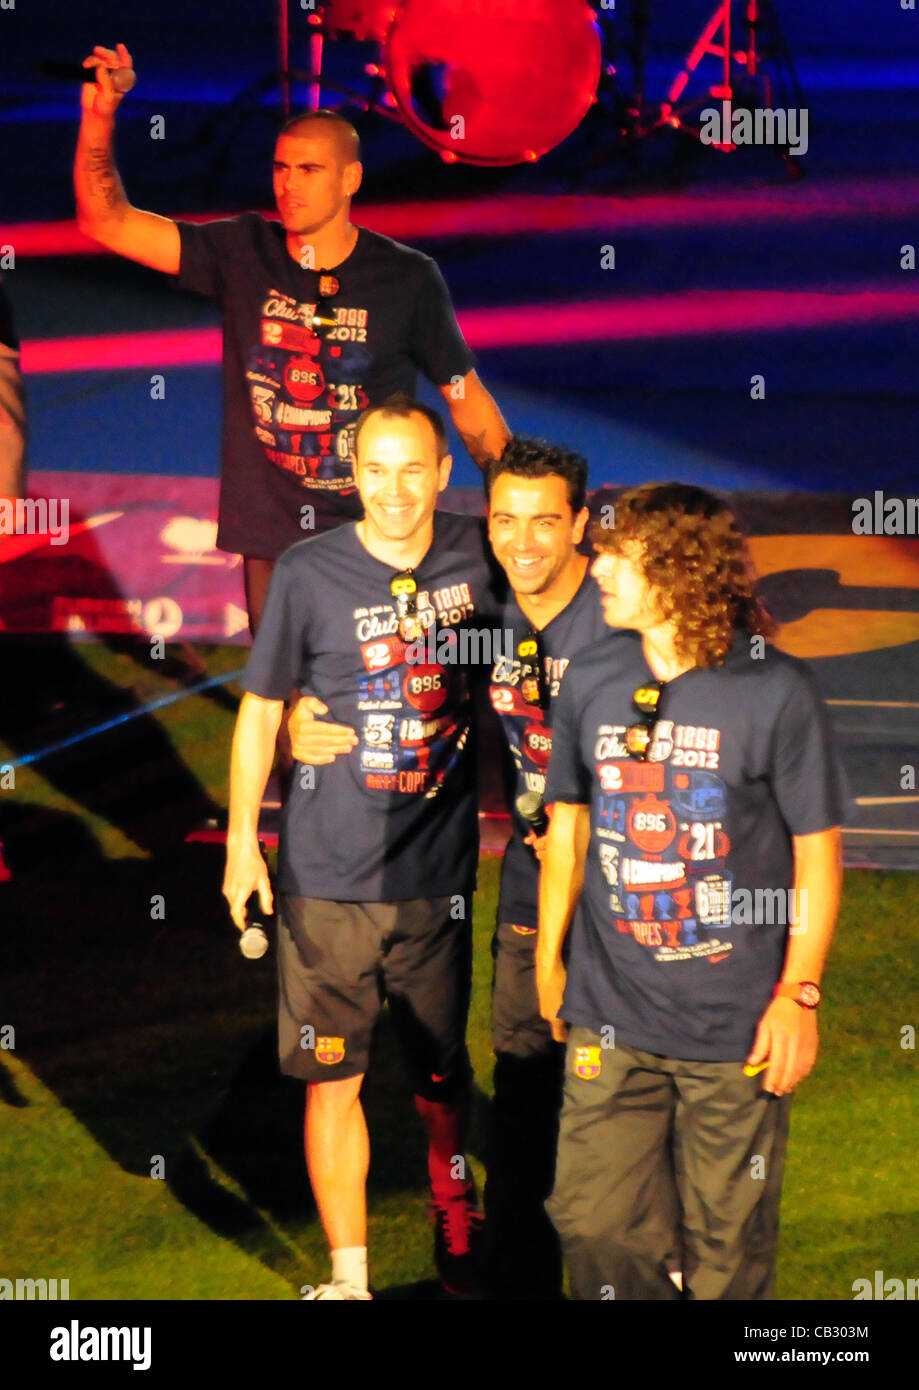 FC Barcelona trophy presentation to the fans (Barcelona, may 26 2012) The four captains of of FC Barcelona (from left to right, Victor Valdes, Andres Iniesta, Xavi Hernandez and Puyol) walk off the stage after speaking to the fans in a ceremony held after winning the Copa del Rey. Stock Photo